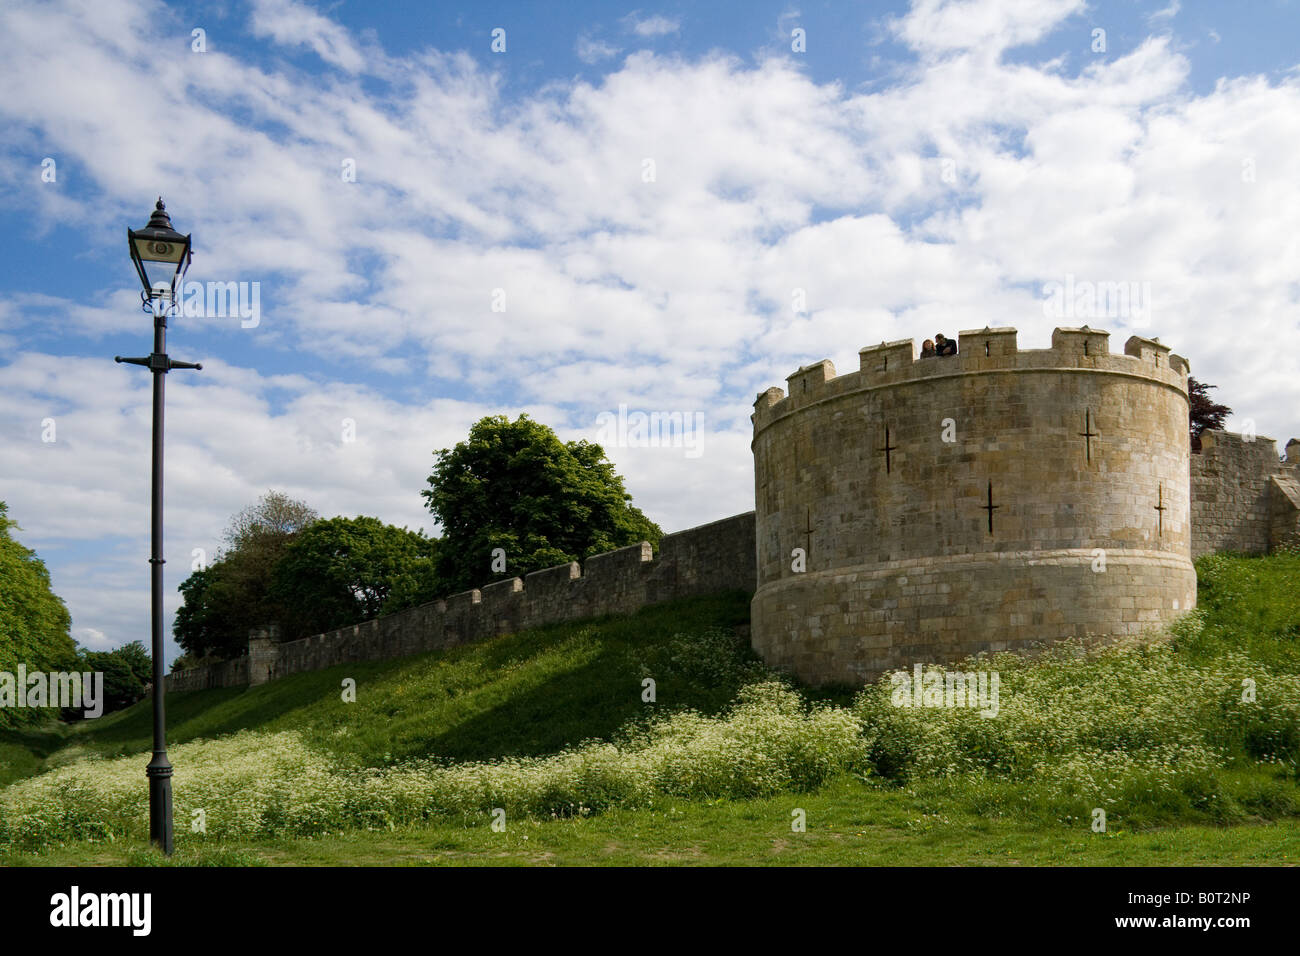 York city walls in the spring, showing the battlements under a blue sky (North Yorkshire, England) Stock Photo